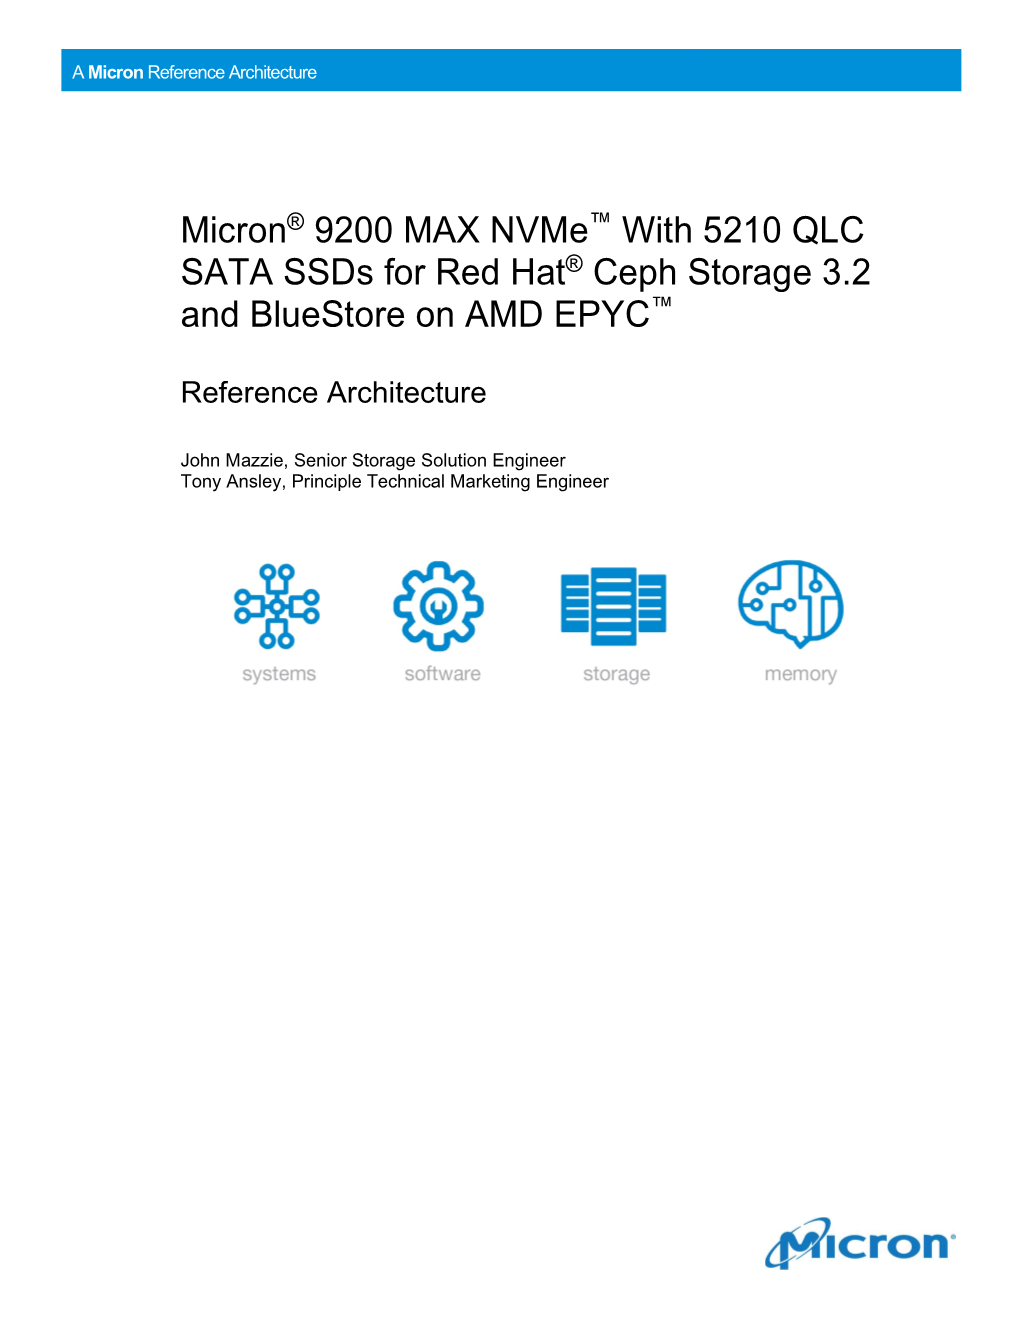 Micron® 9200 MAX Nvme™ with 5210 QLC SATA Ssds for Red Hat® Ceph Storage 3.2 and Bluestore on AMD EPYC™